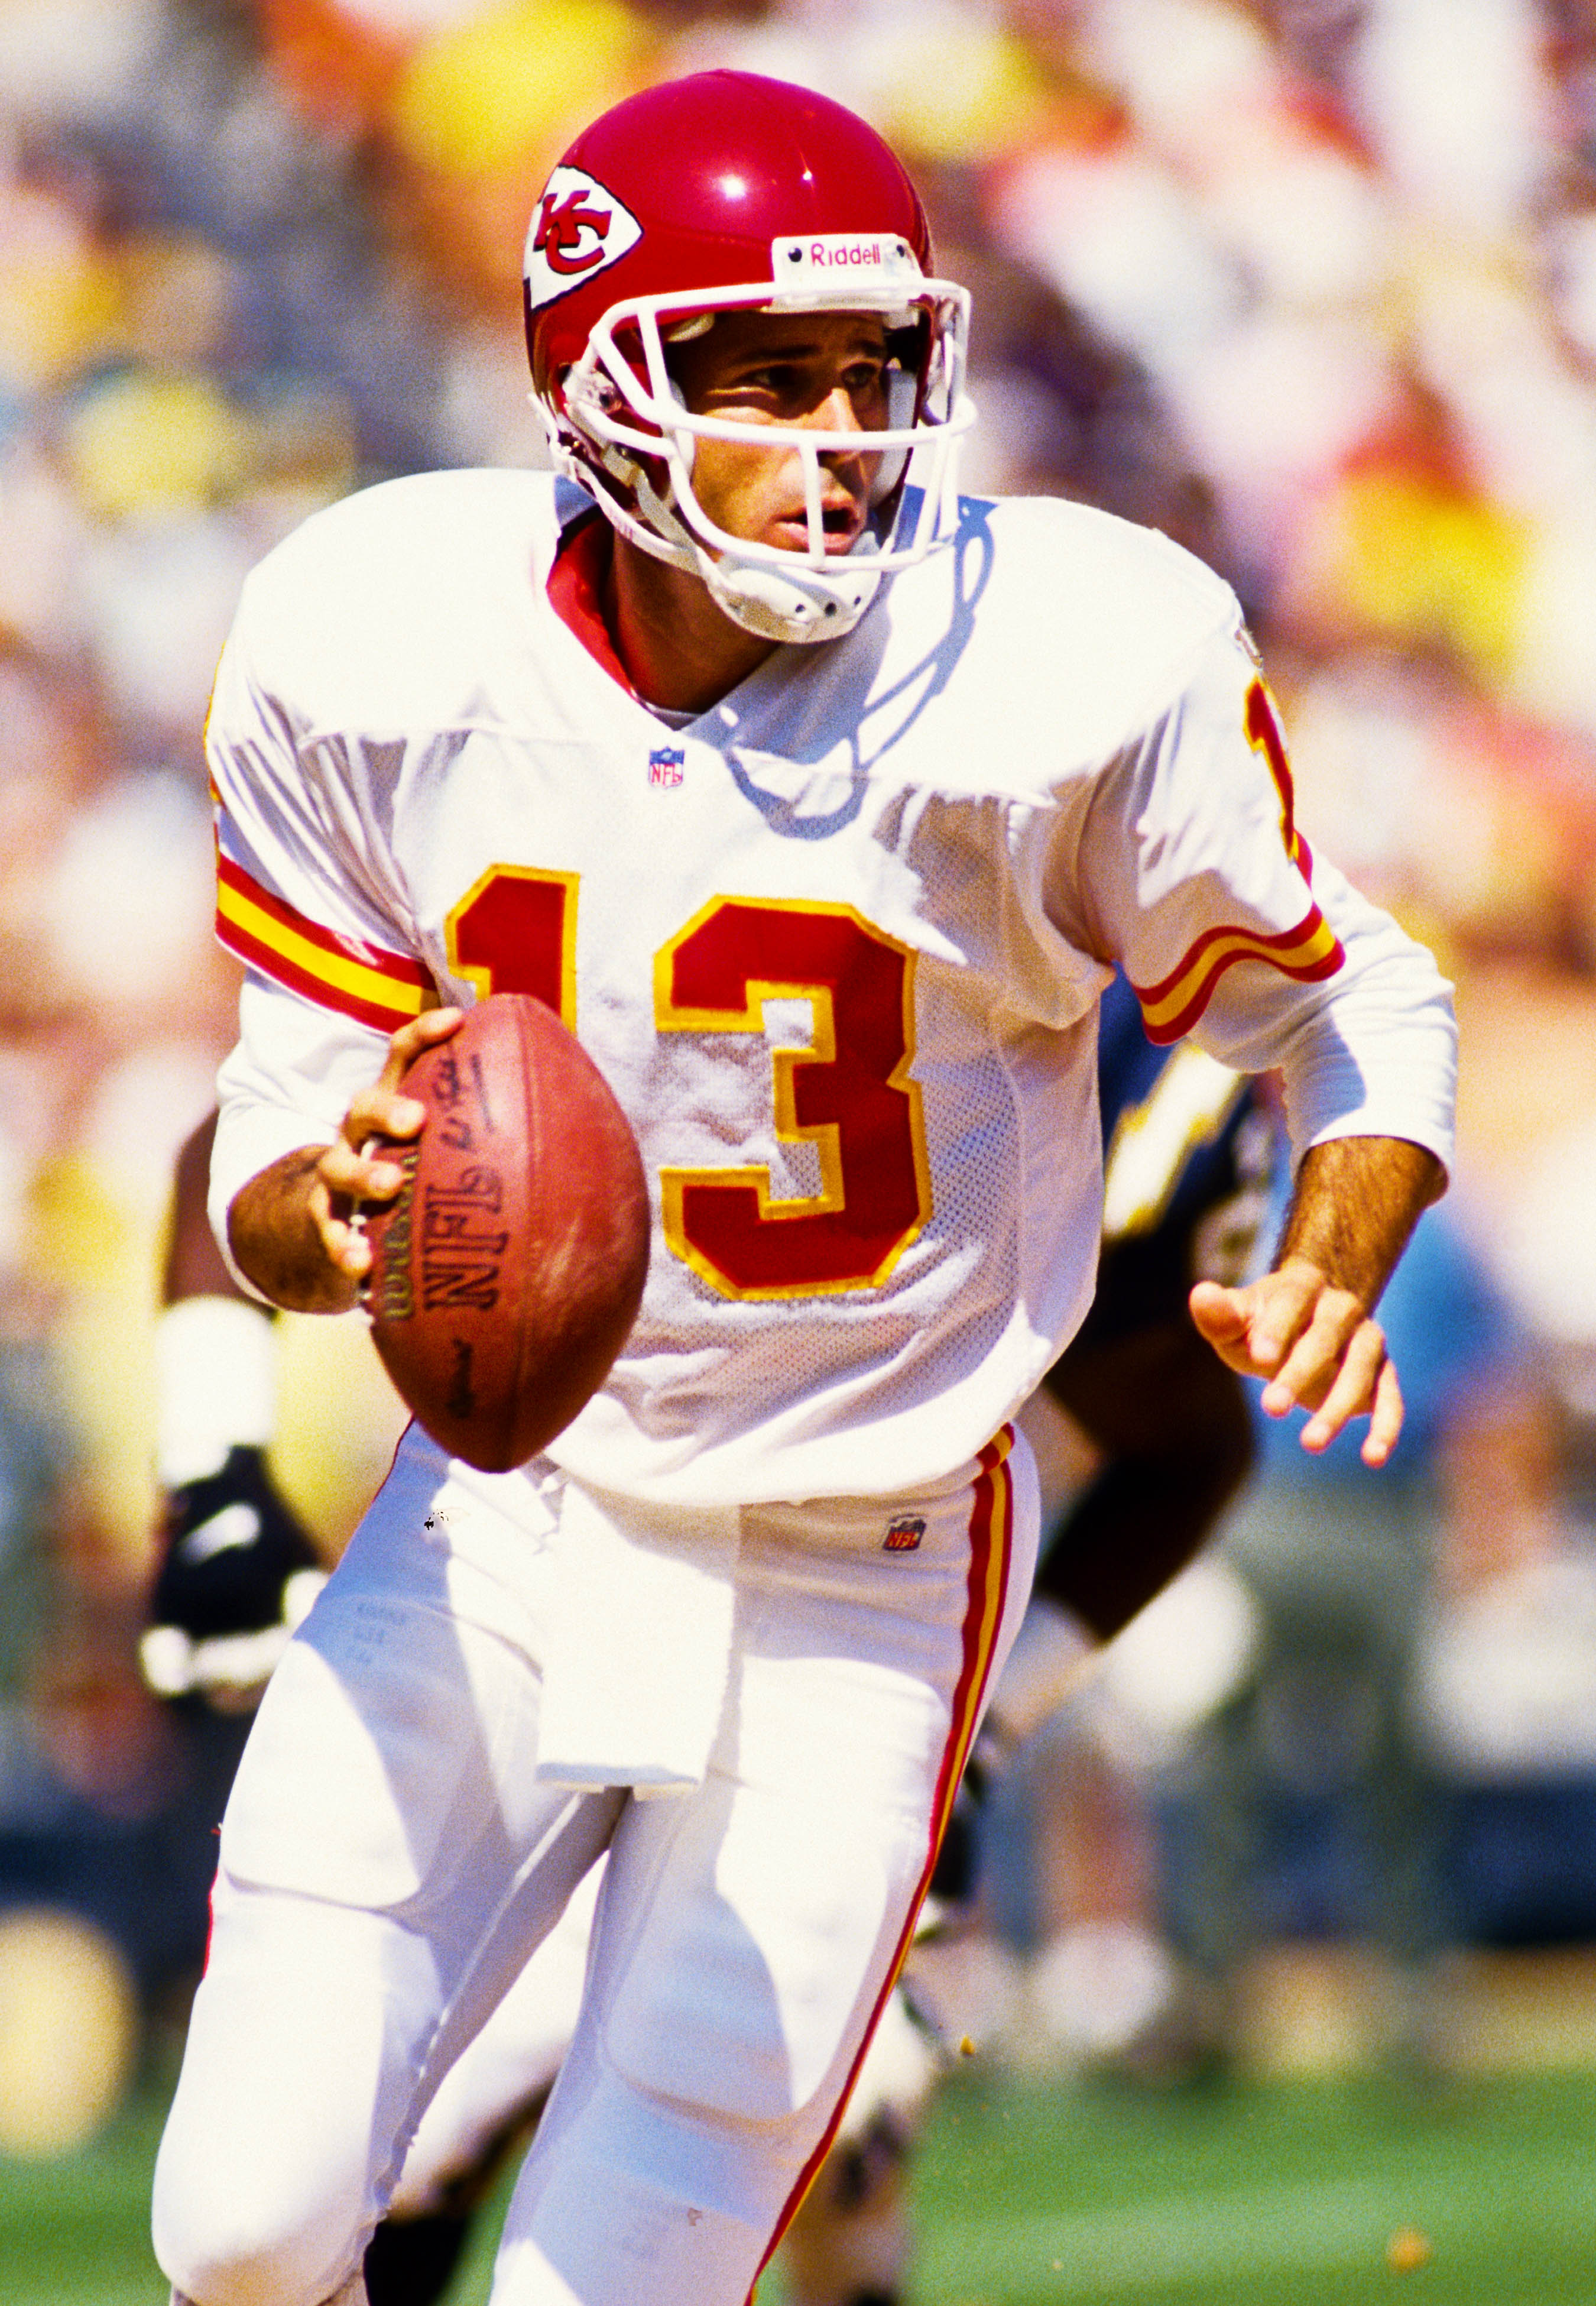 Ranking the top 10 Kansas City Chiefs QBs of all time